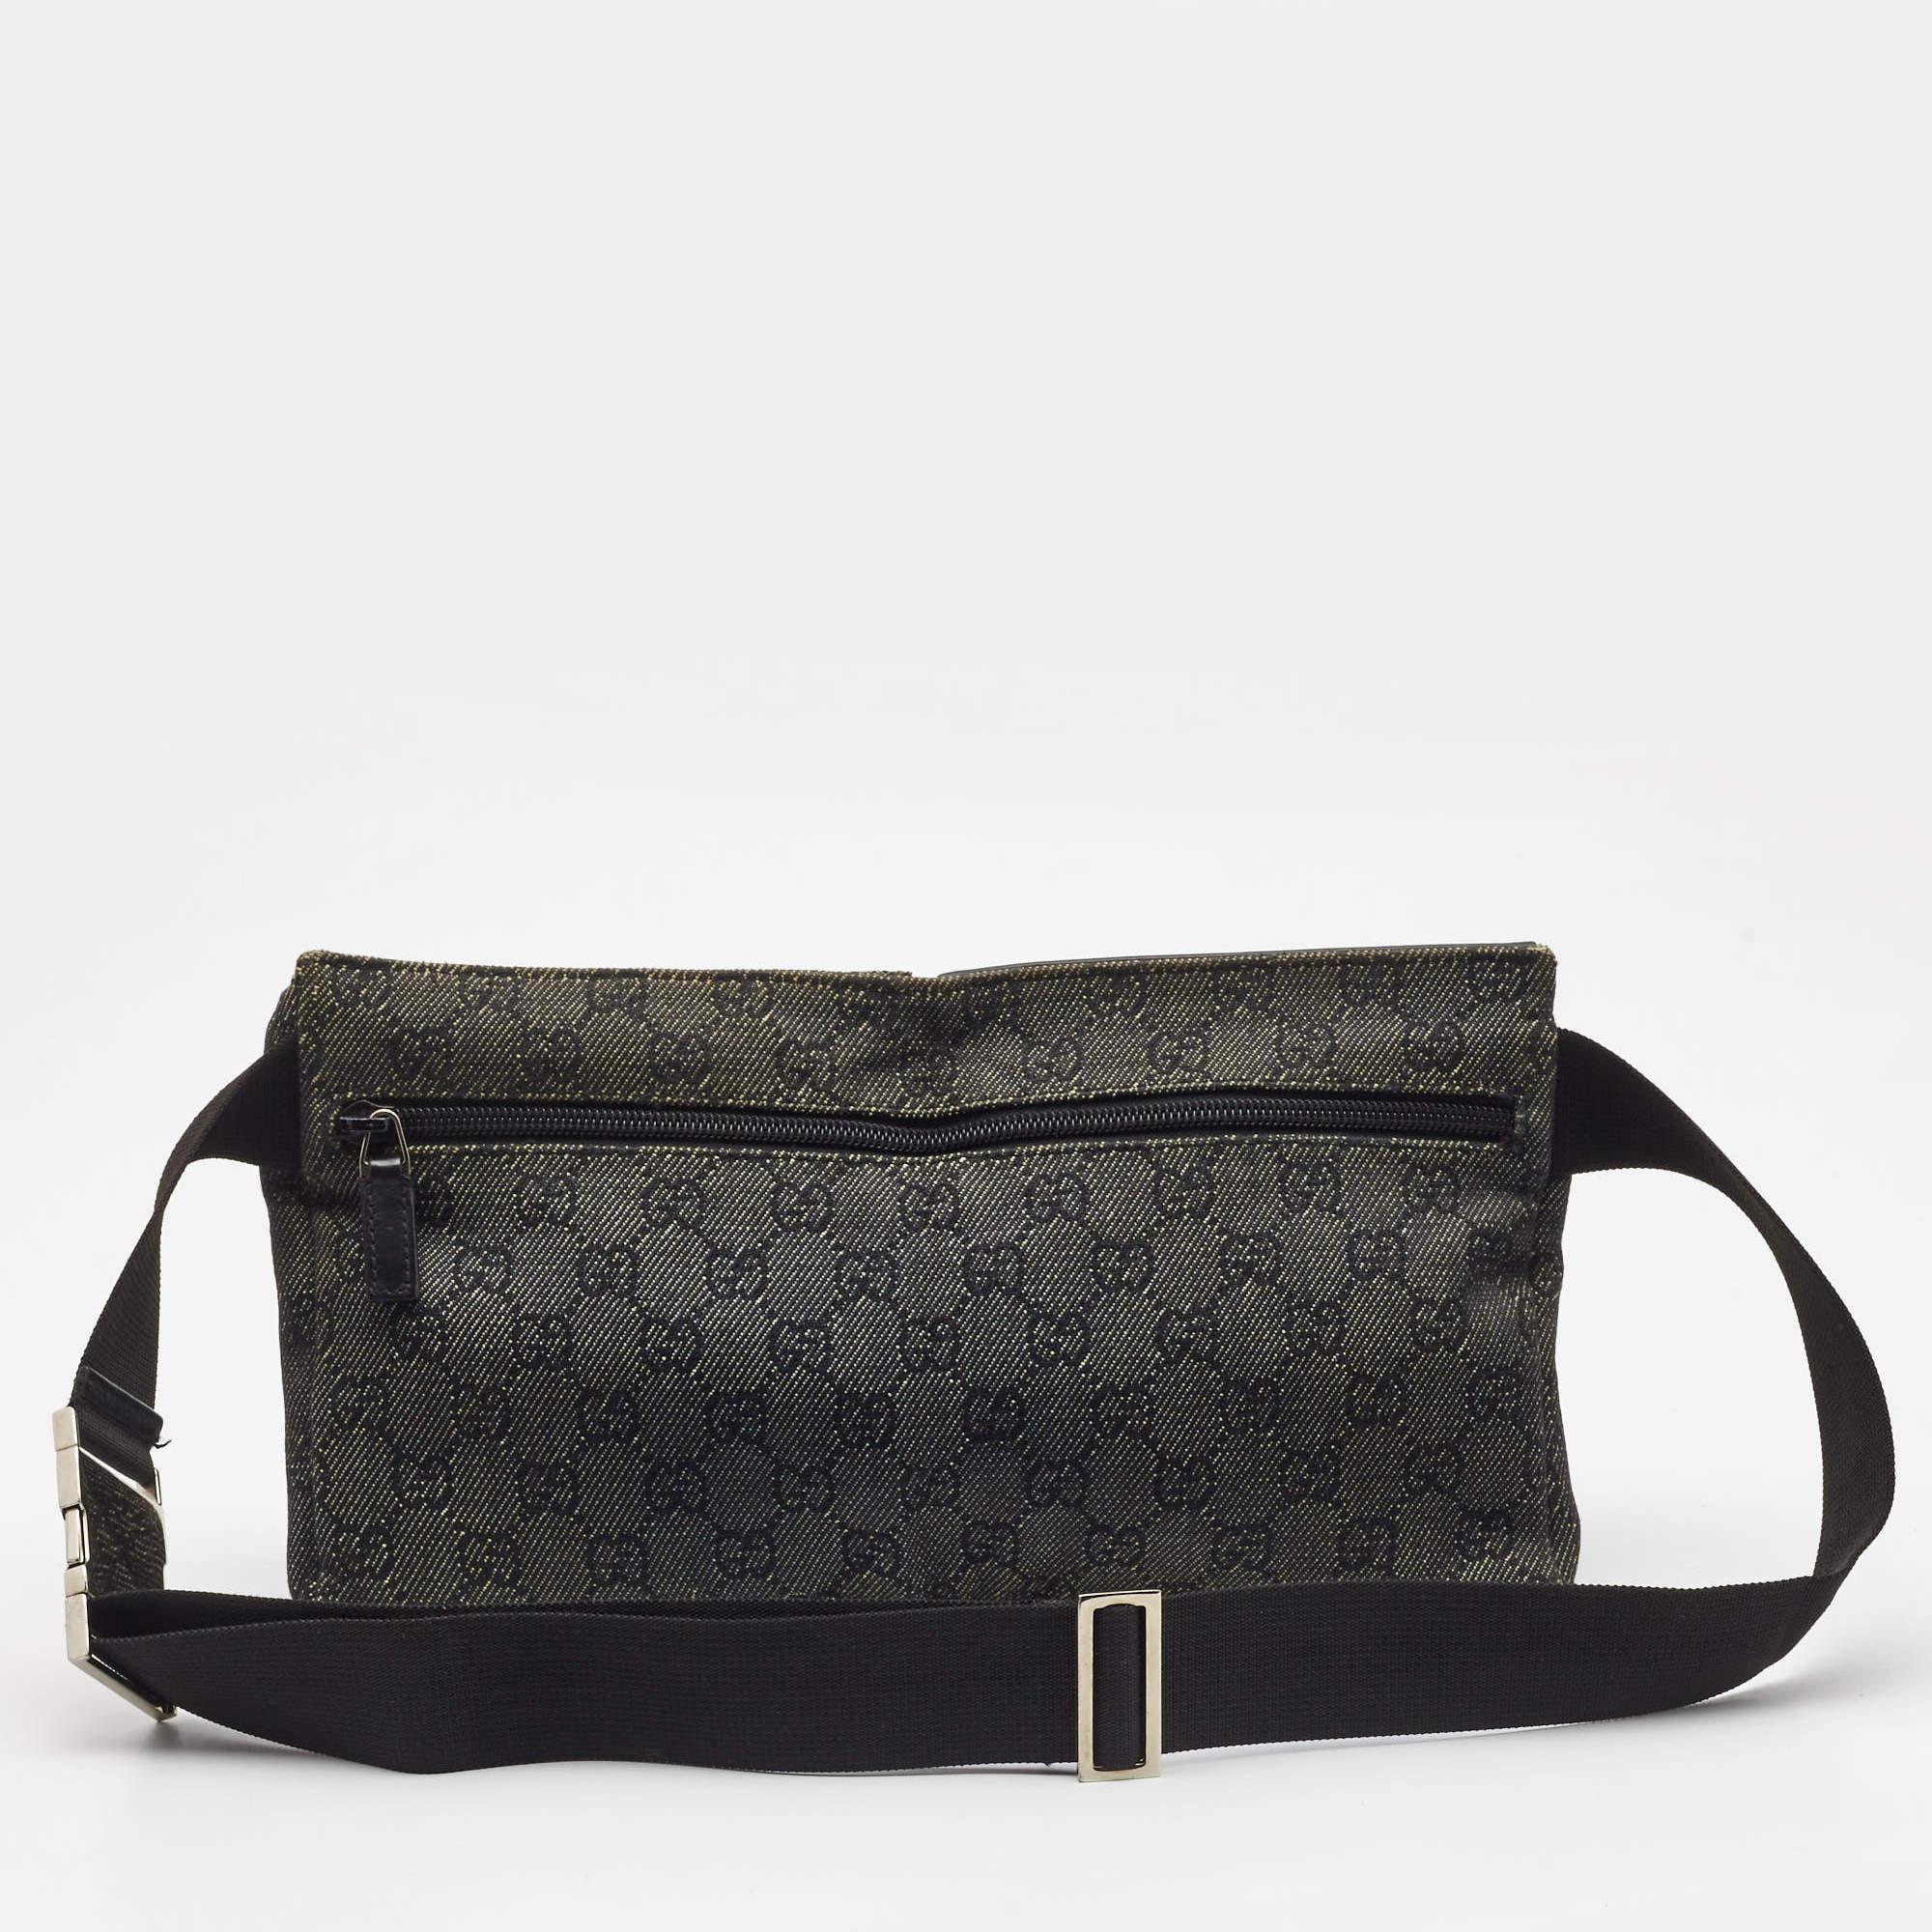 Thoughtful details, high quality, and everyday convenience mark this waist bag for women by Gucci. The bag is sewn with skill to deliver a refined look and an impeccable finish.

